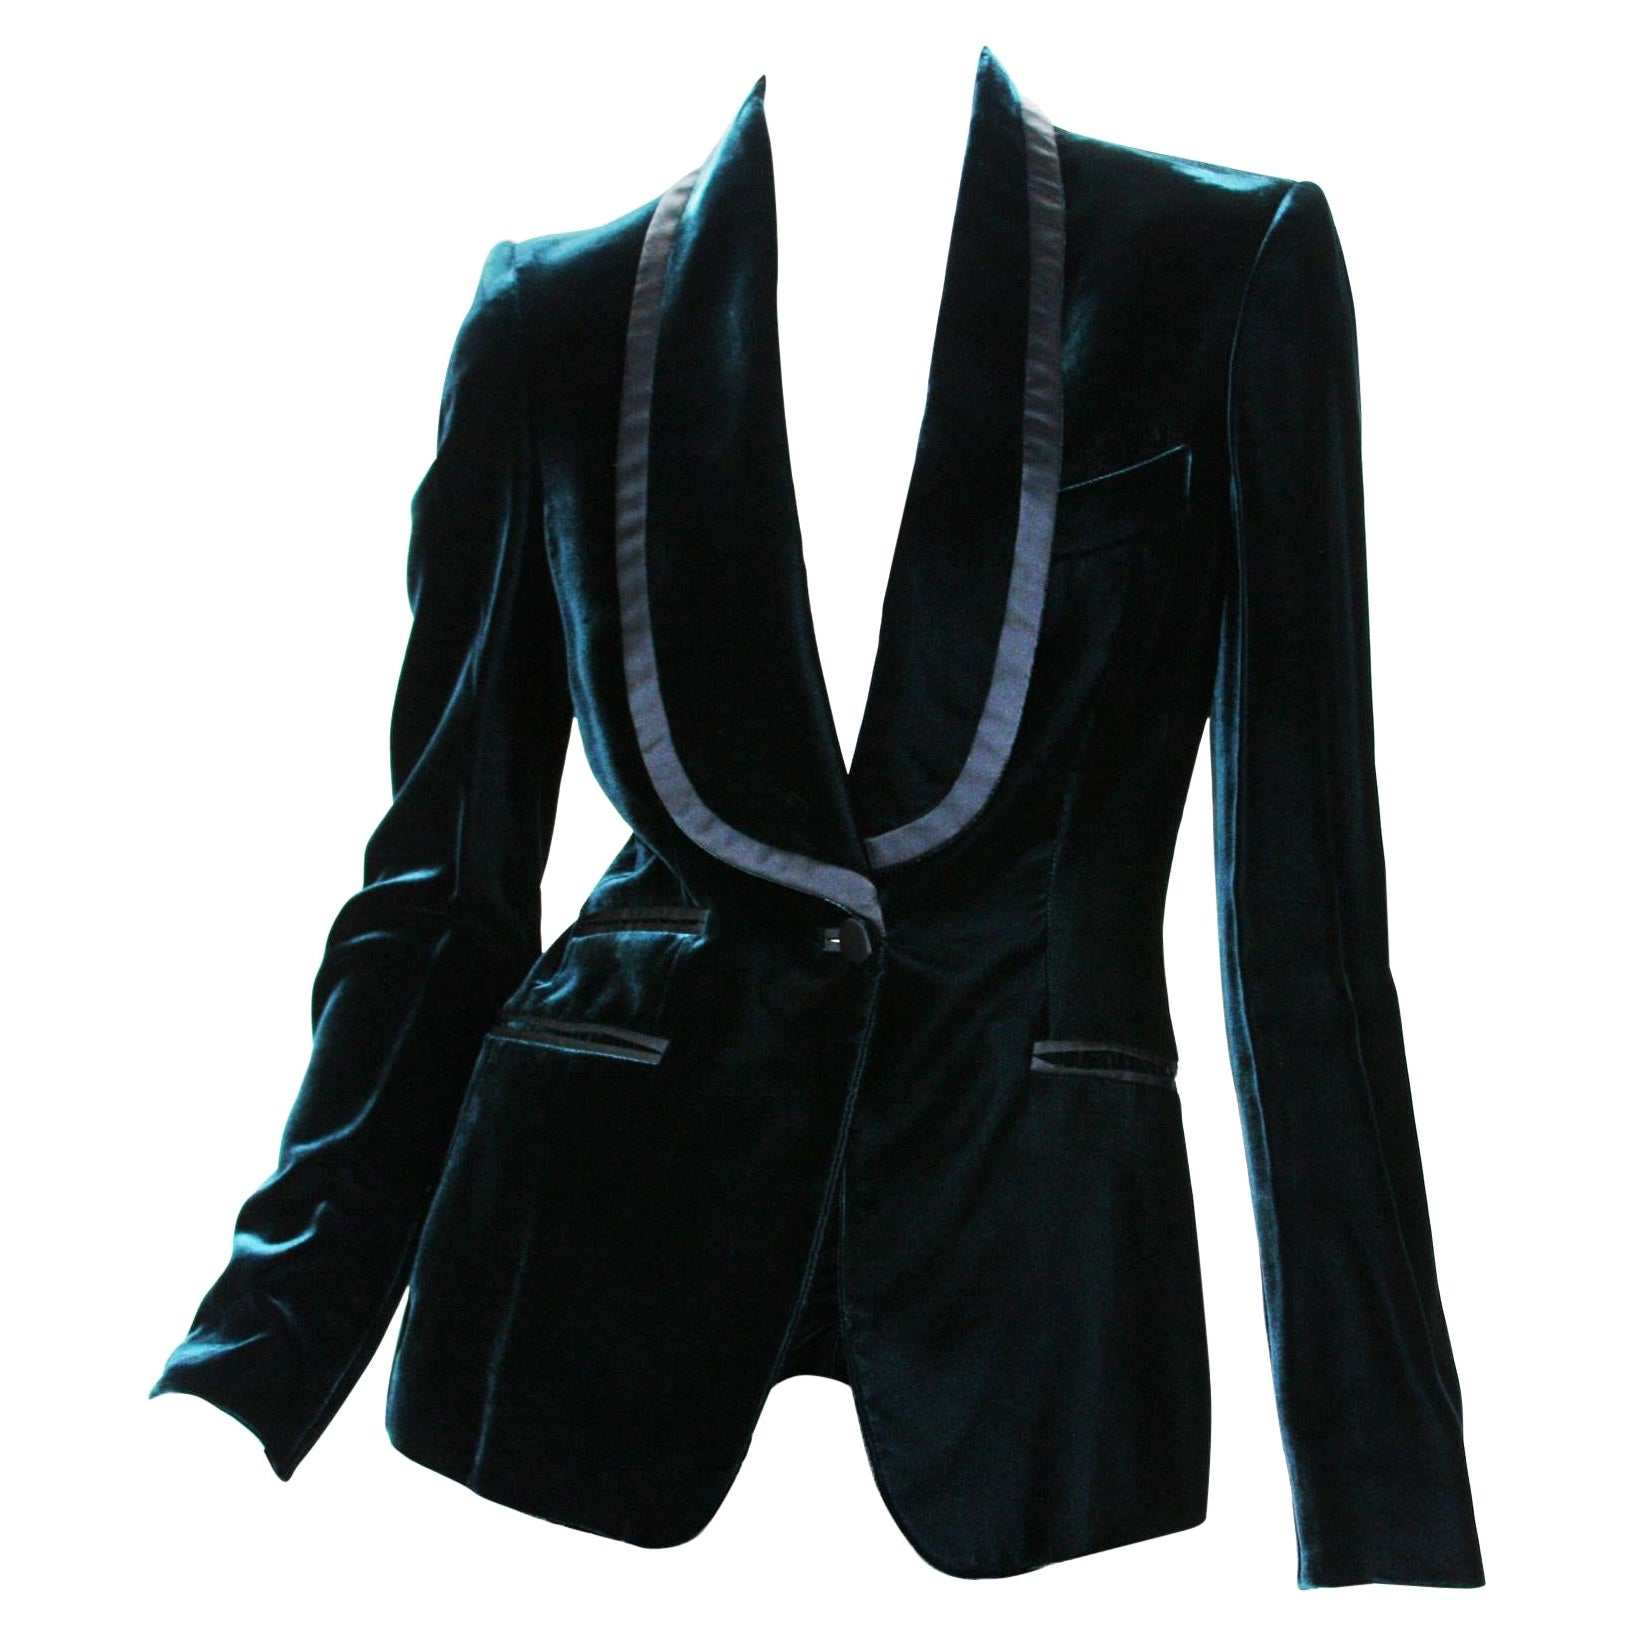 Tom Ford for Gucci F/W 2004 Runway Velvet Emerald Green Tuxedo Jacket 38 and 40 For Sale